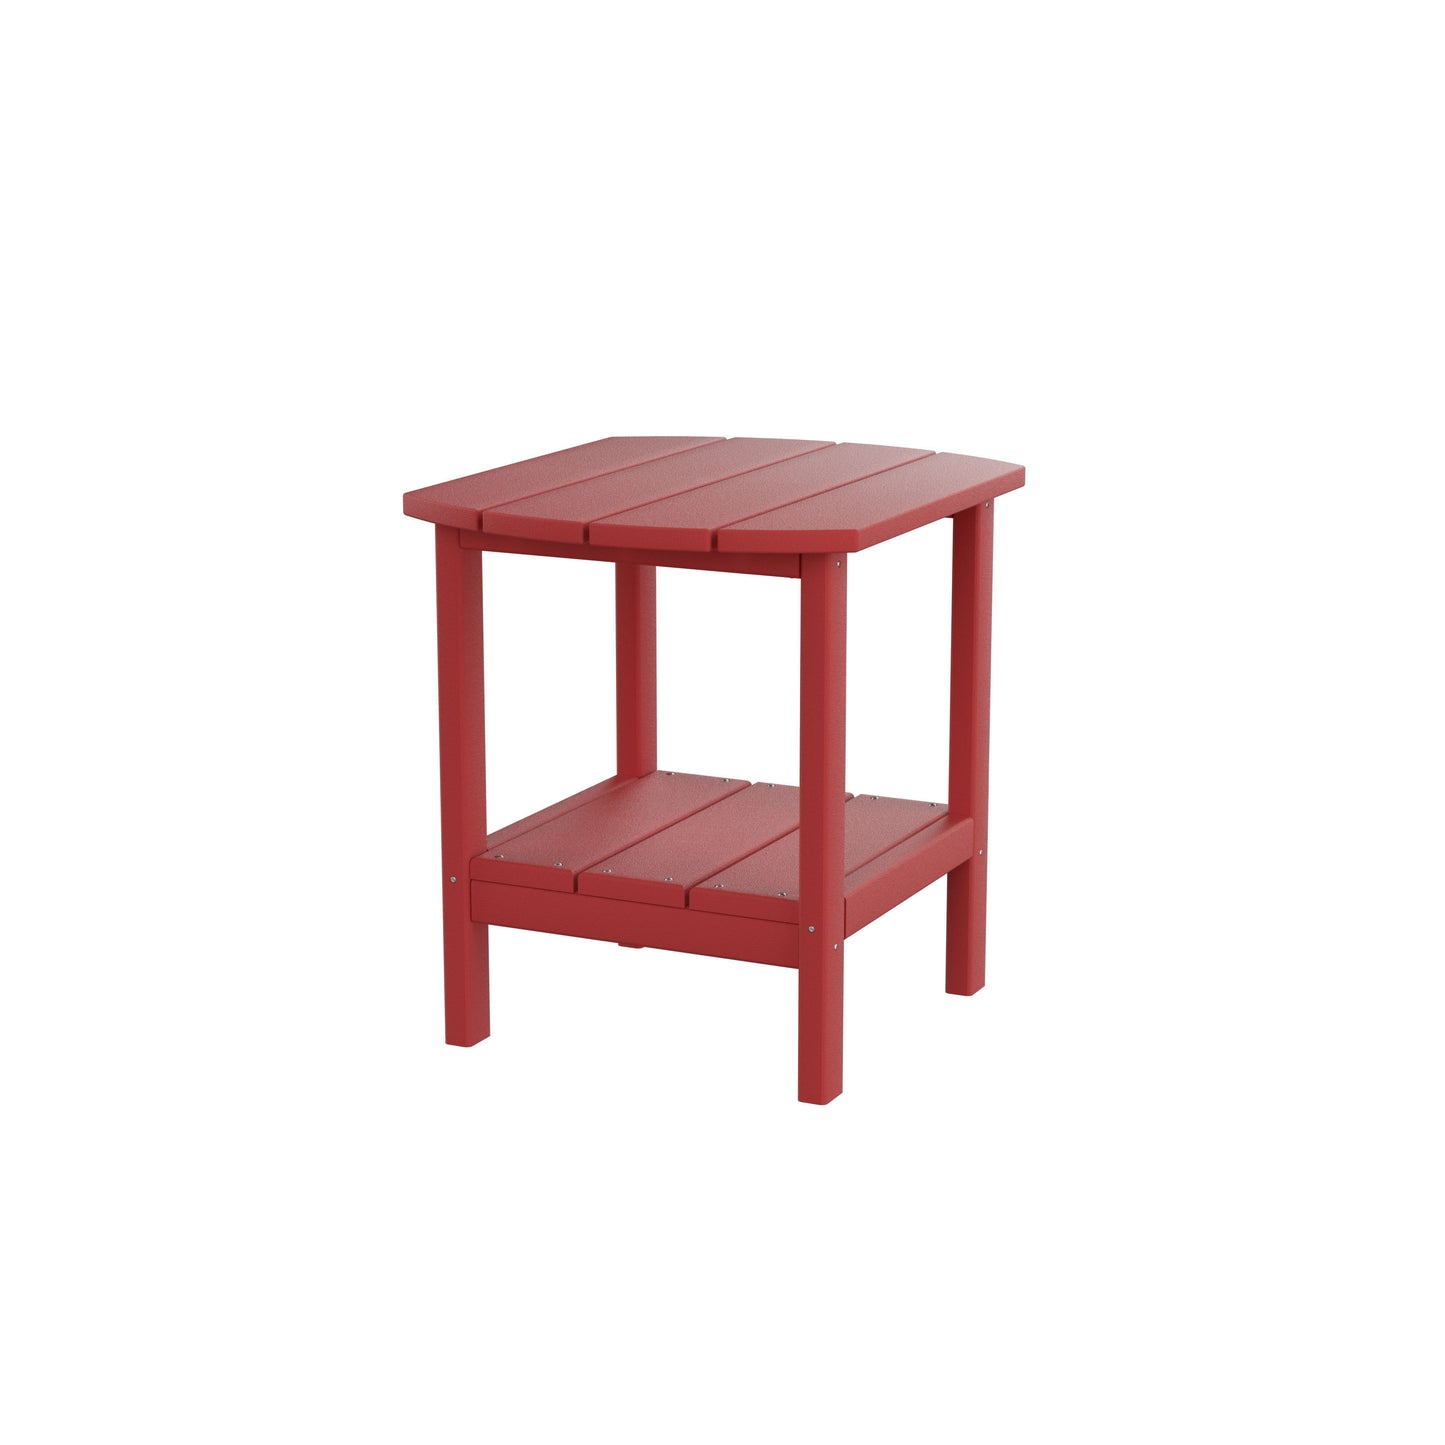 HDPE side table,adirondack table,porch table, patio table for outdoor and pool Red